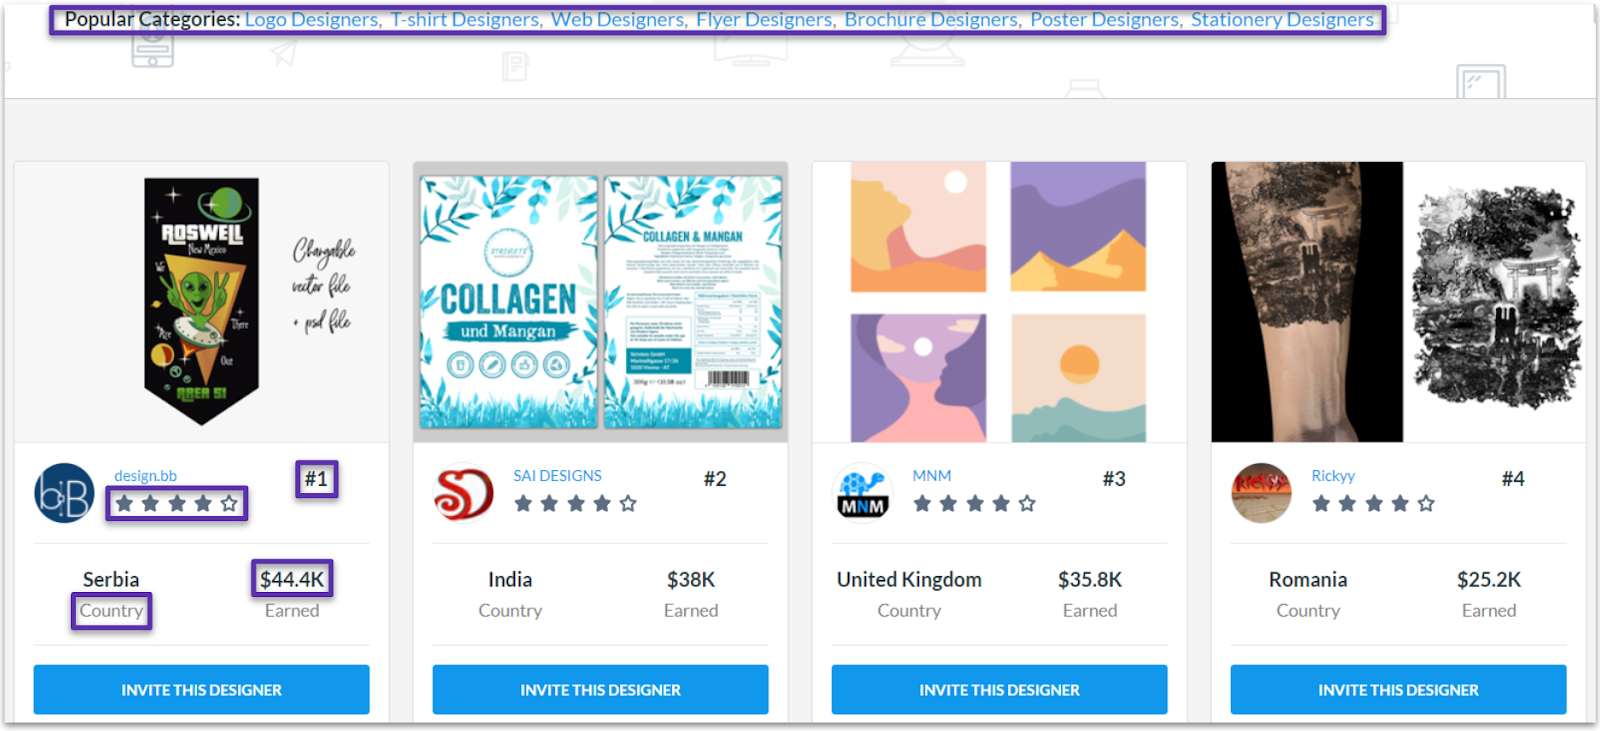 DesignCrowd's graphic designers category page